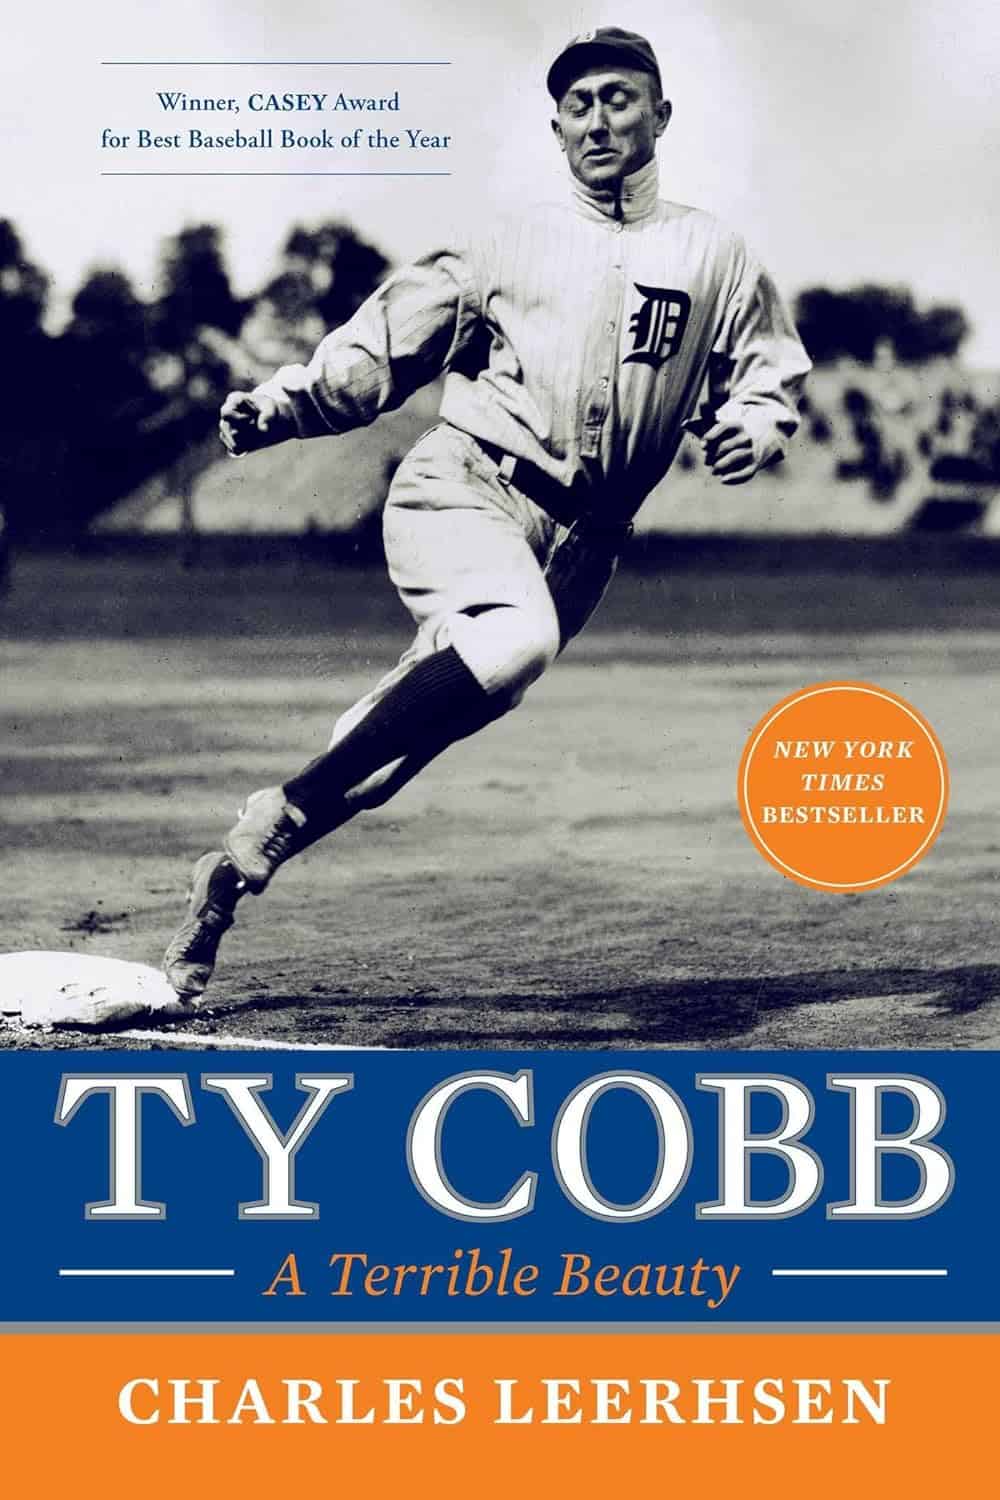 Ty Cobb: A Controversial Figure, by Charles Leerhsen